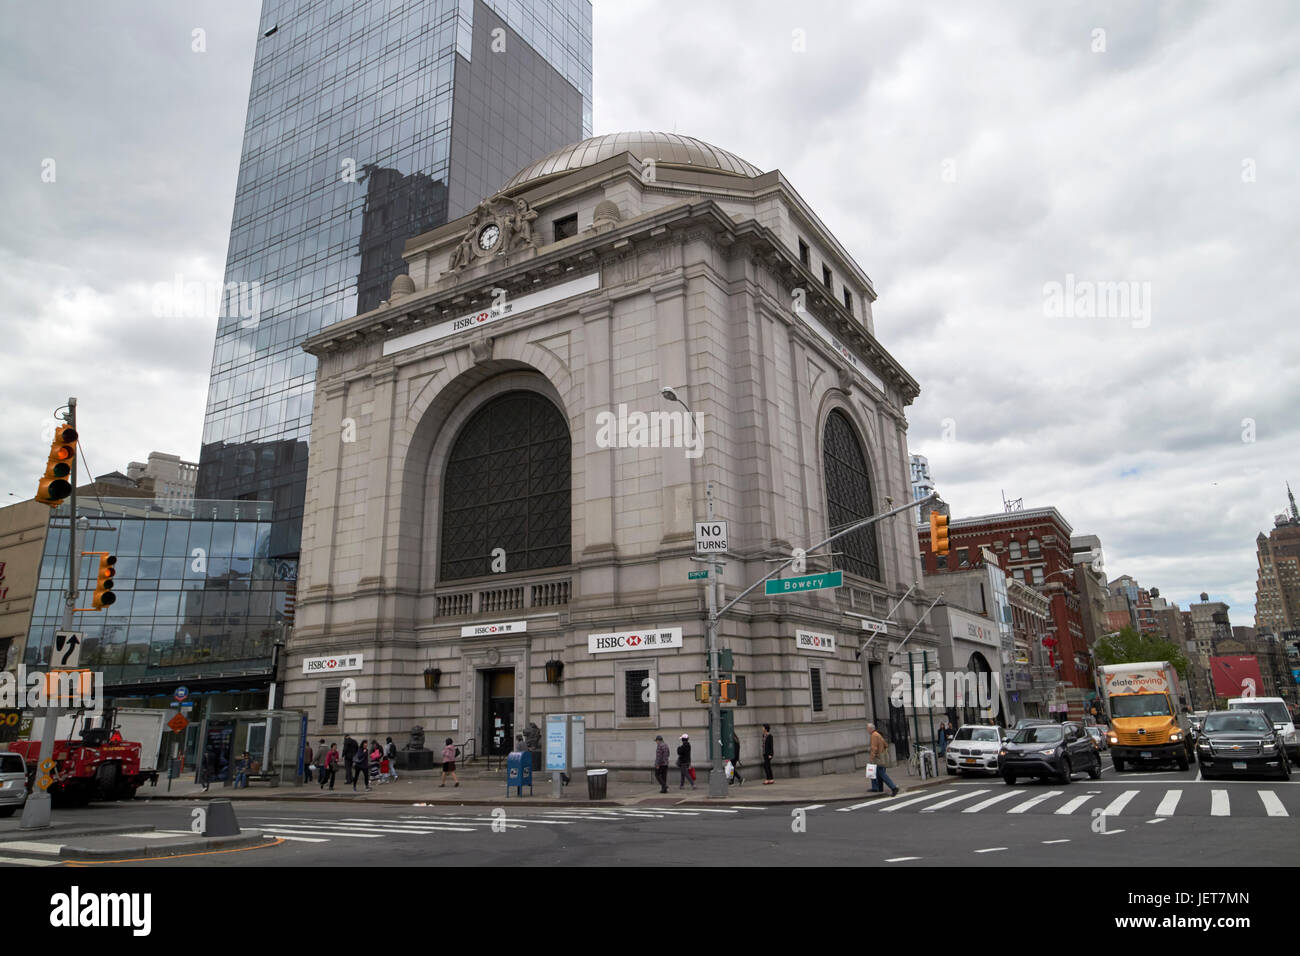 50 and 58 bowery citizens savings bank at junction of bowery and canal street New York City USA Stock Photo